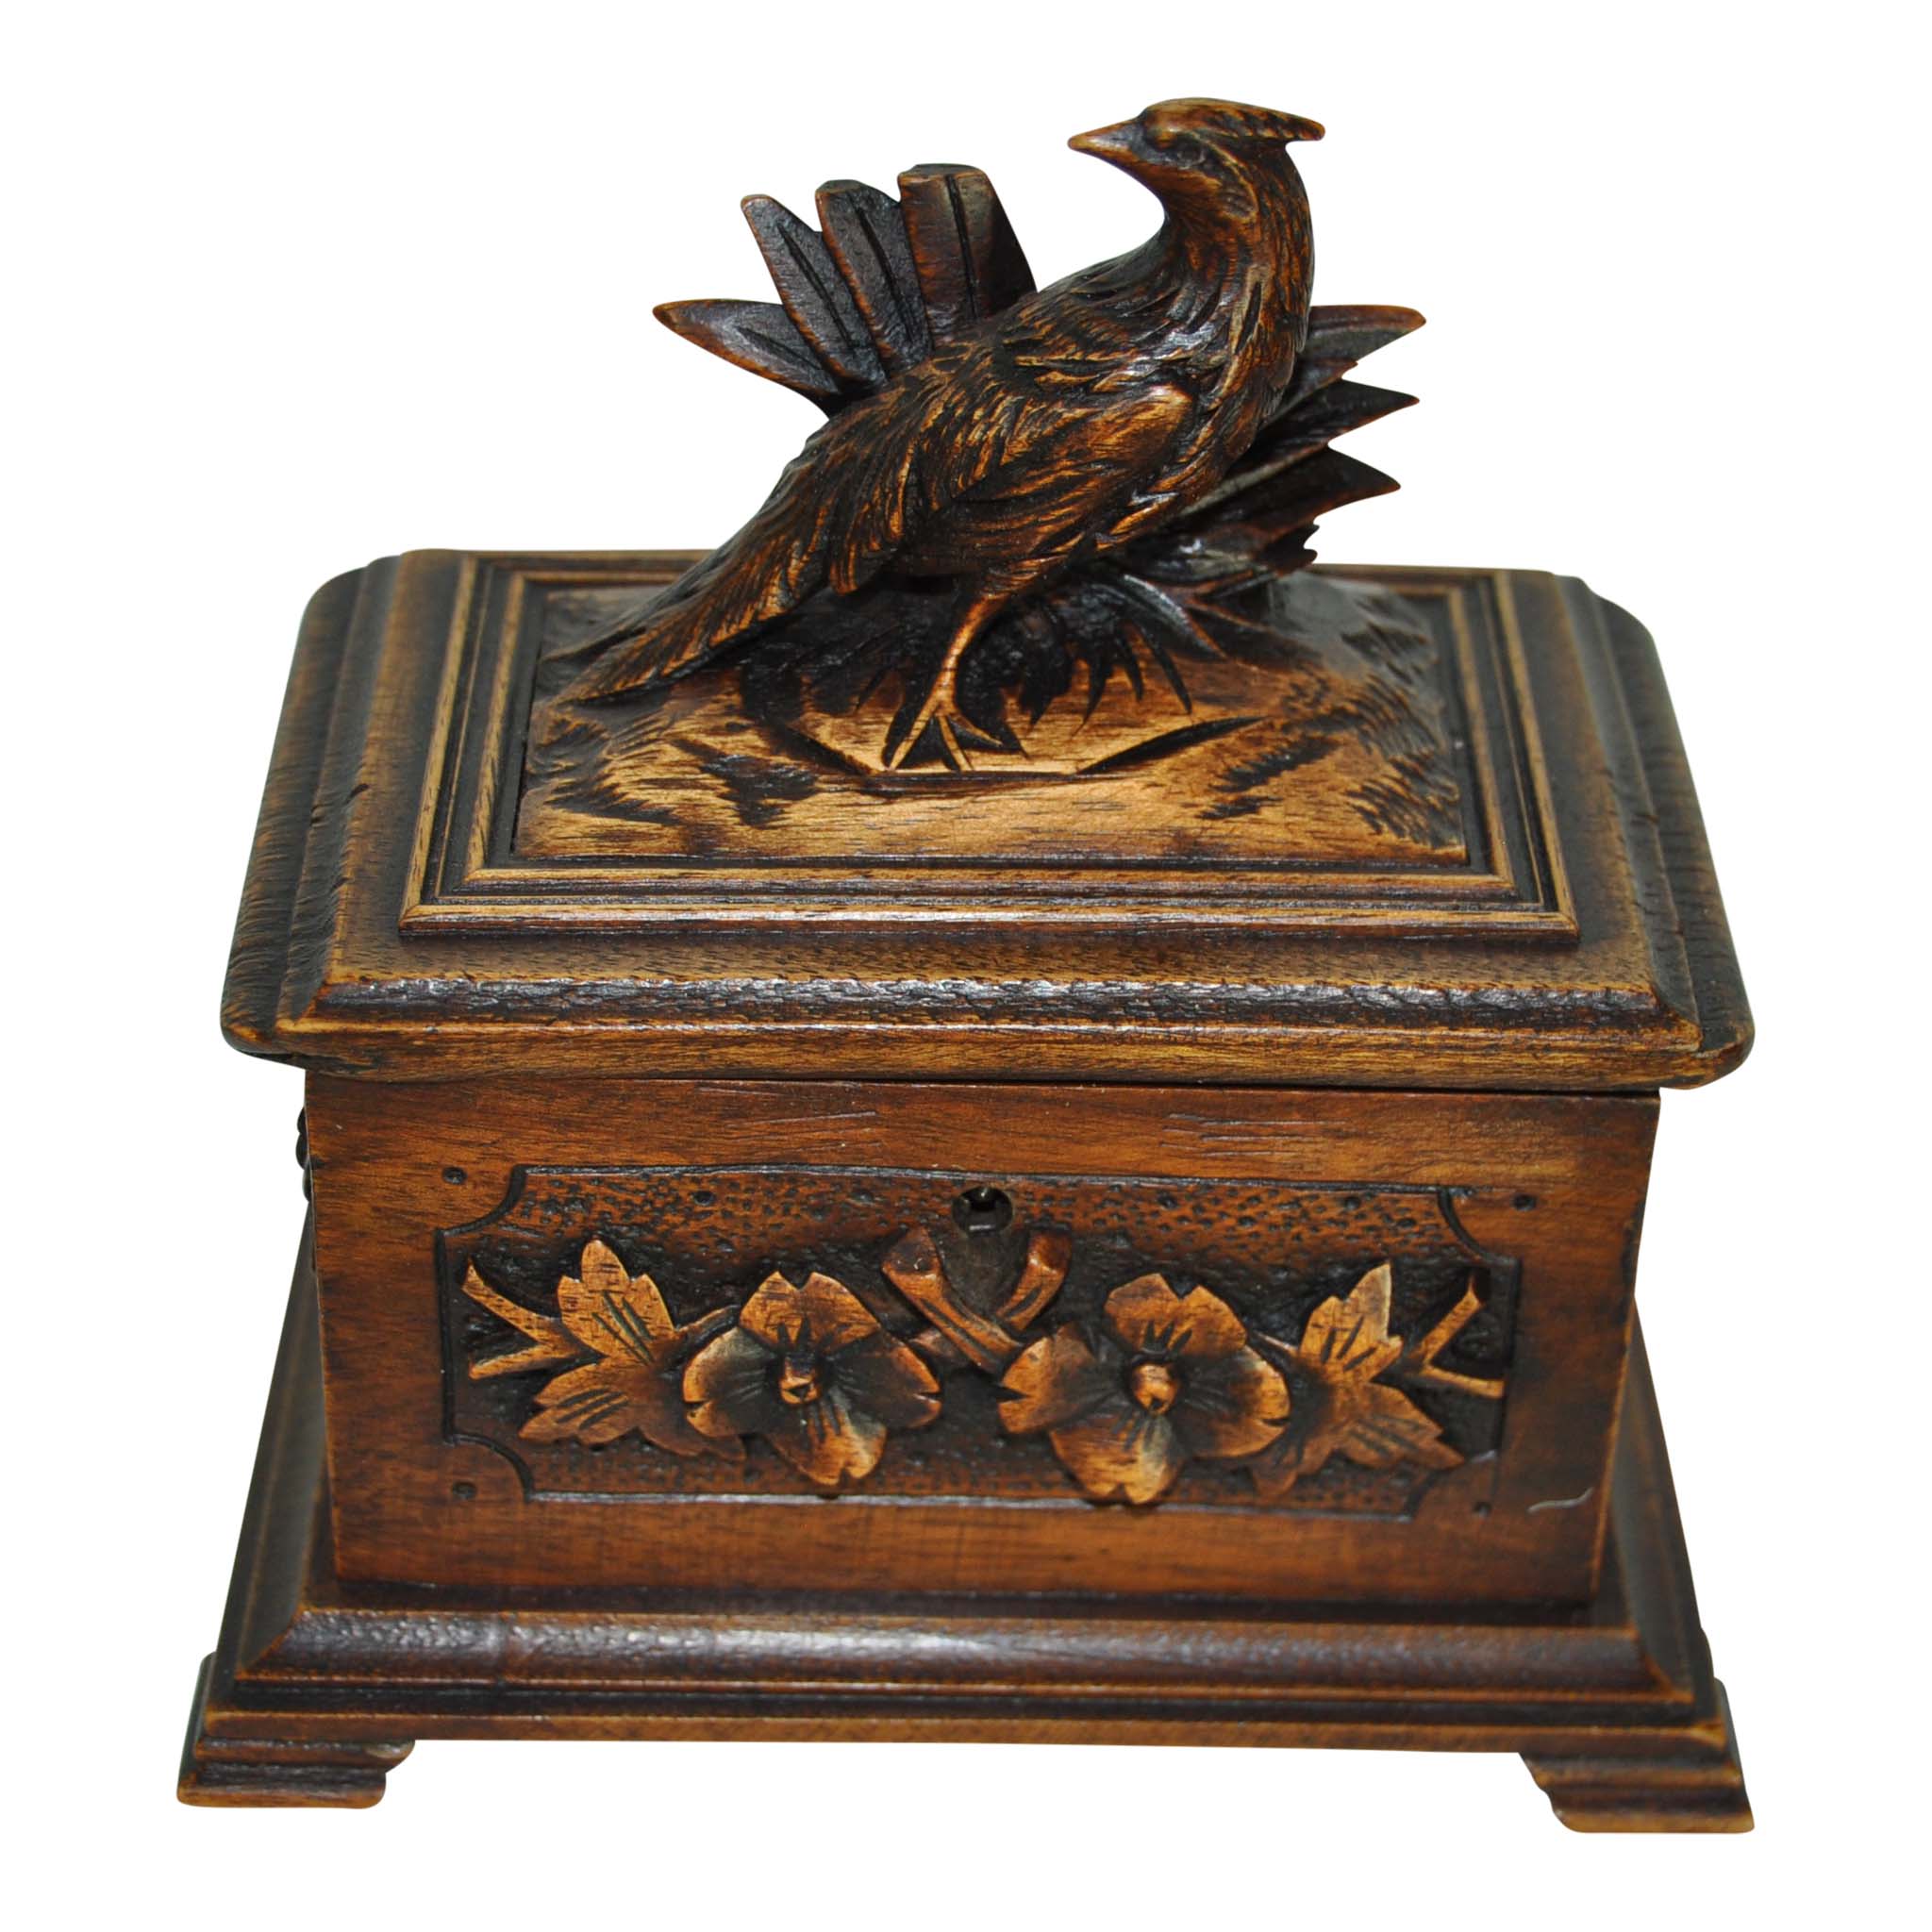 Carved Jewelry Box with Pheasant